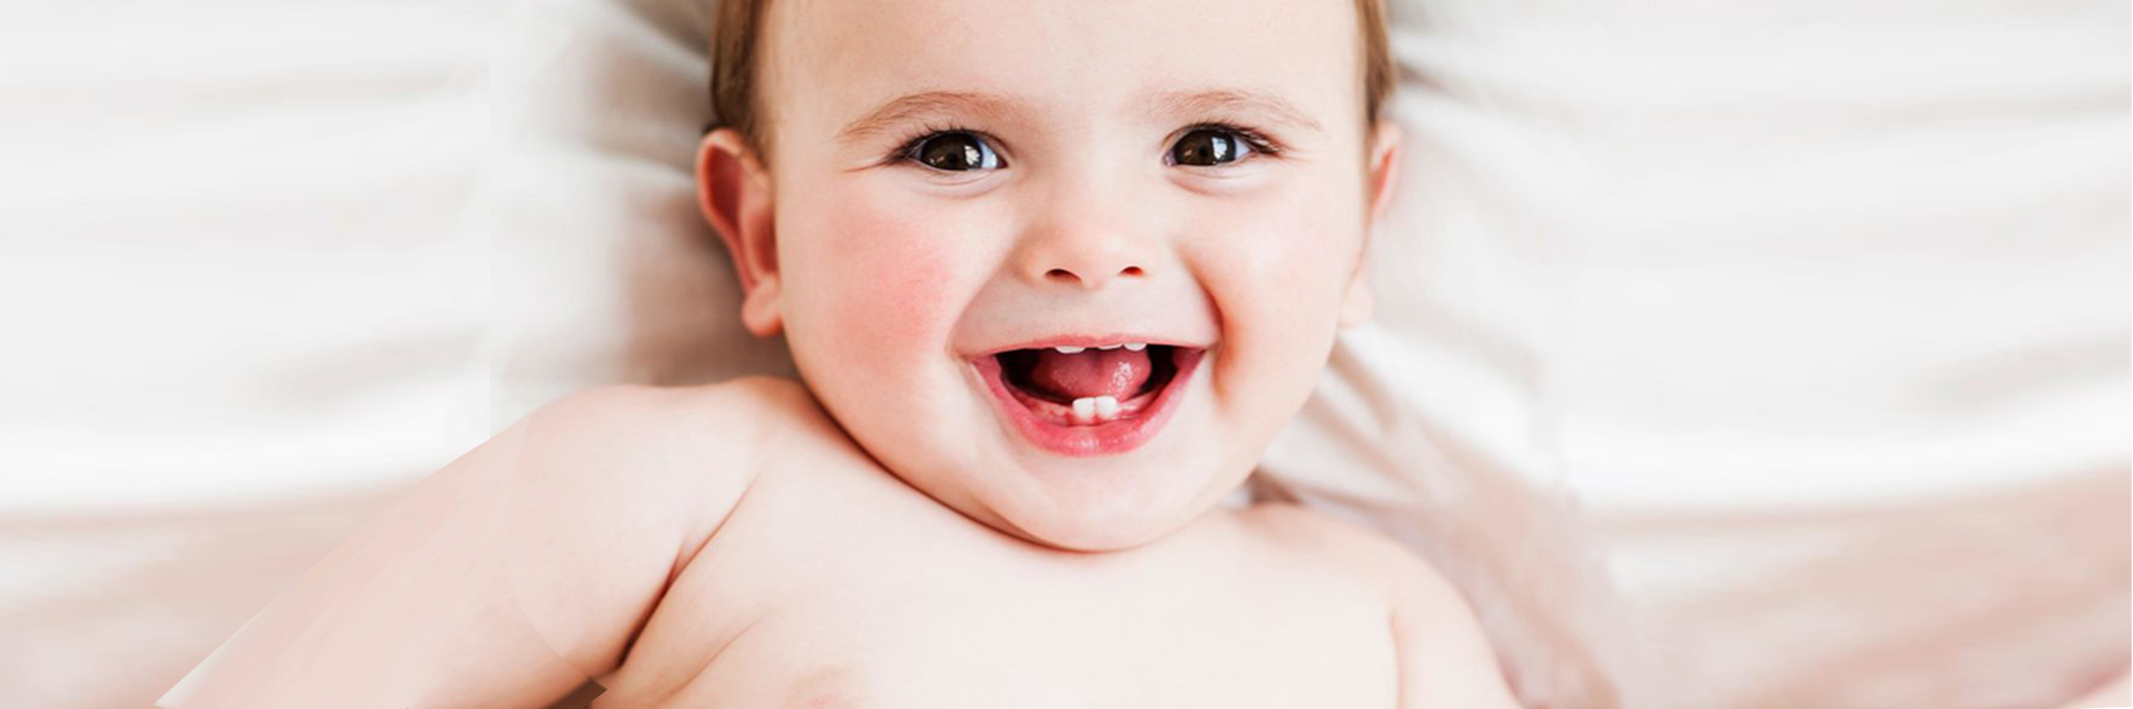 How to Care for Baby's Teeth